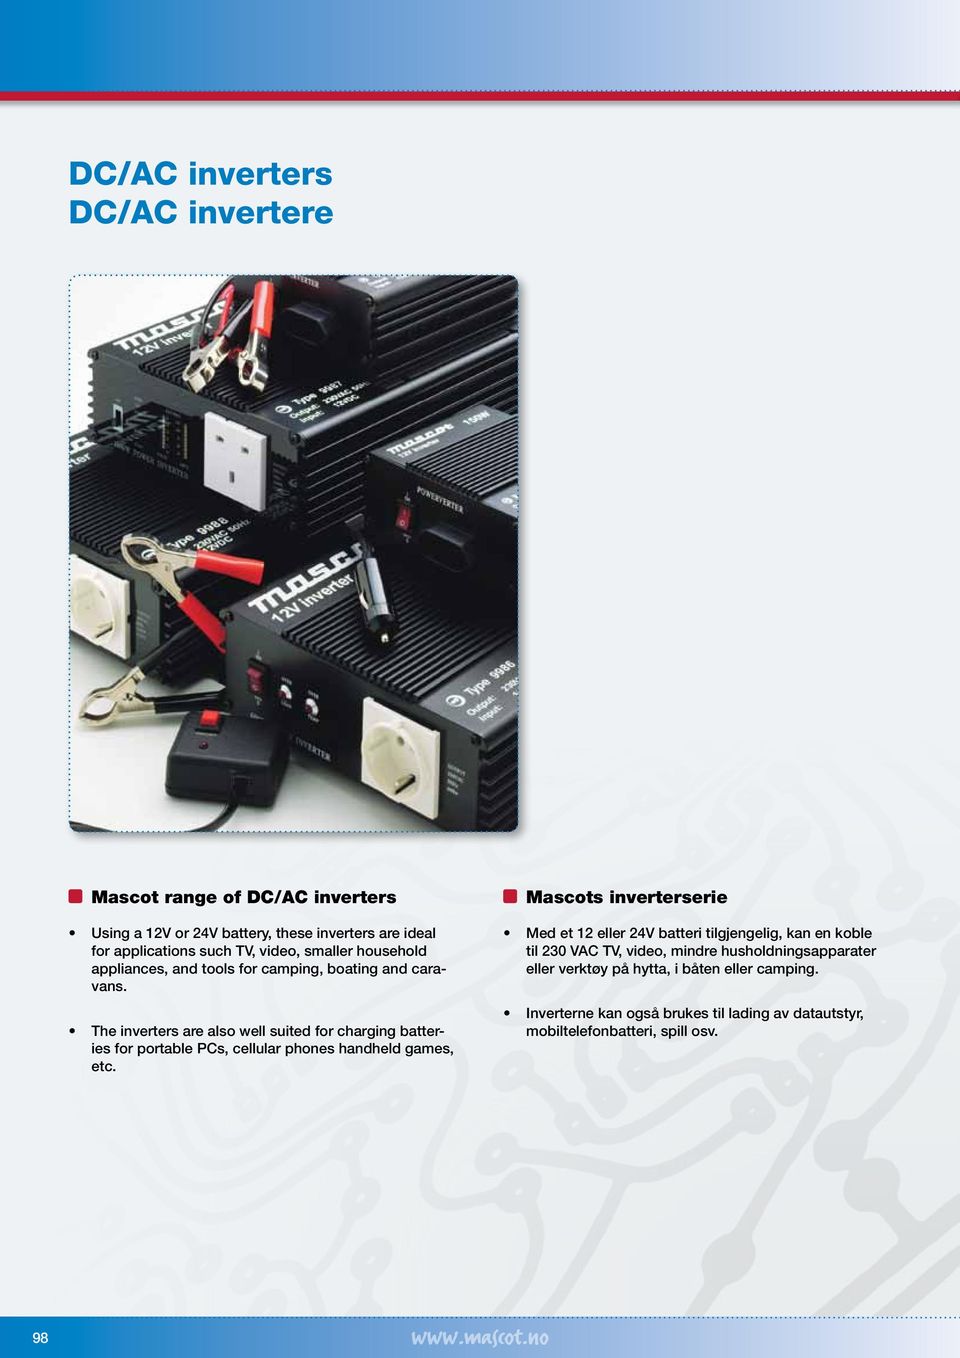 The inverters are also well suited for charging batteries for portable PCs, cellular phones handheld games, etc.